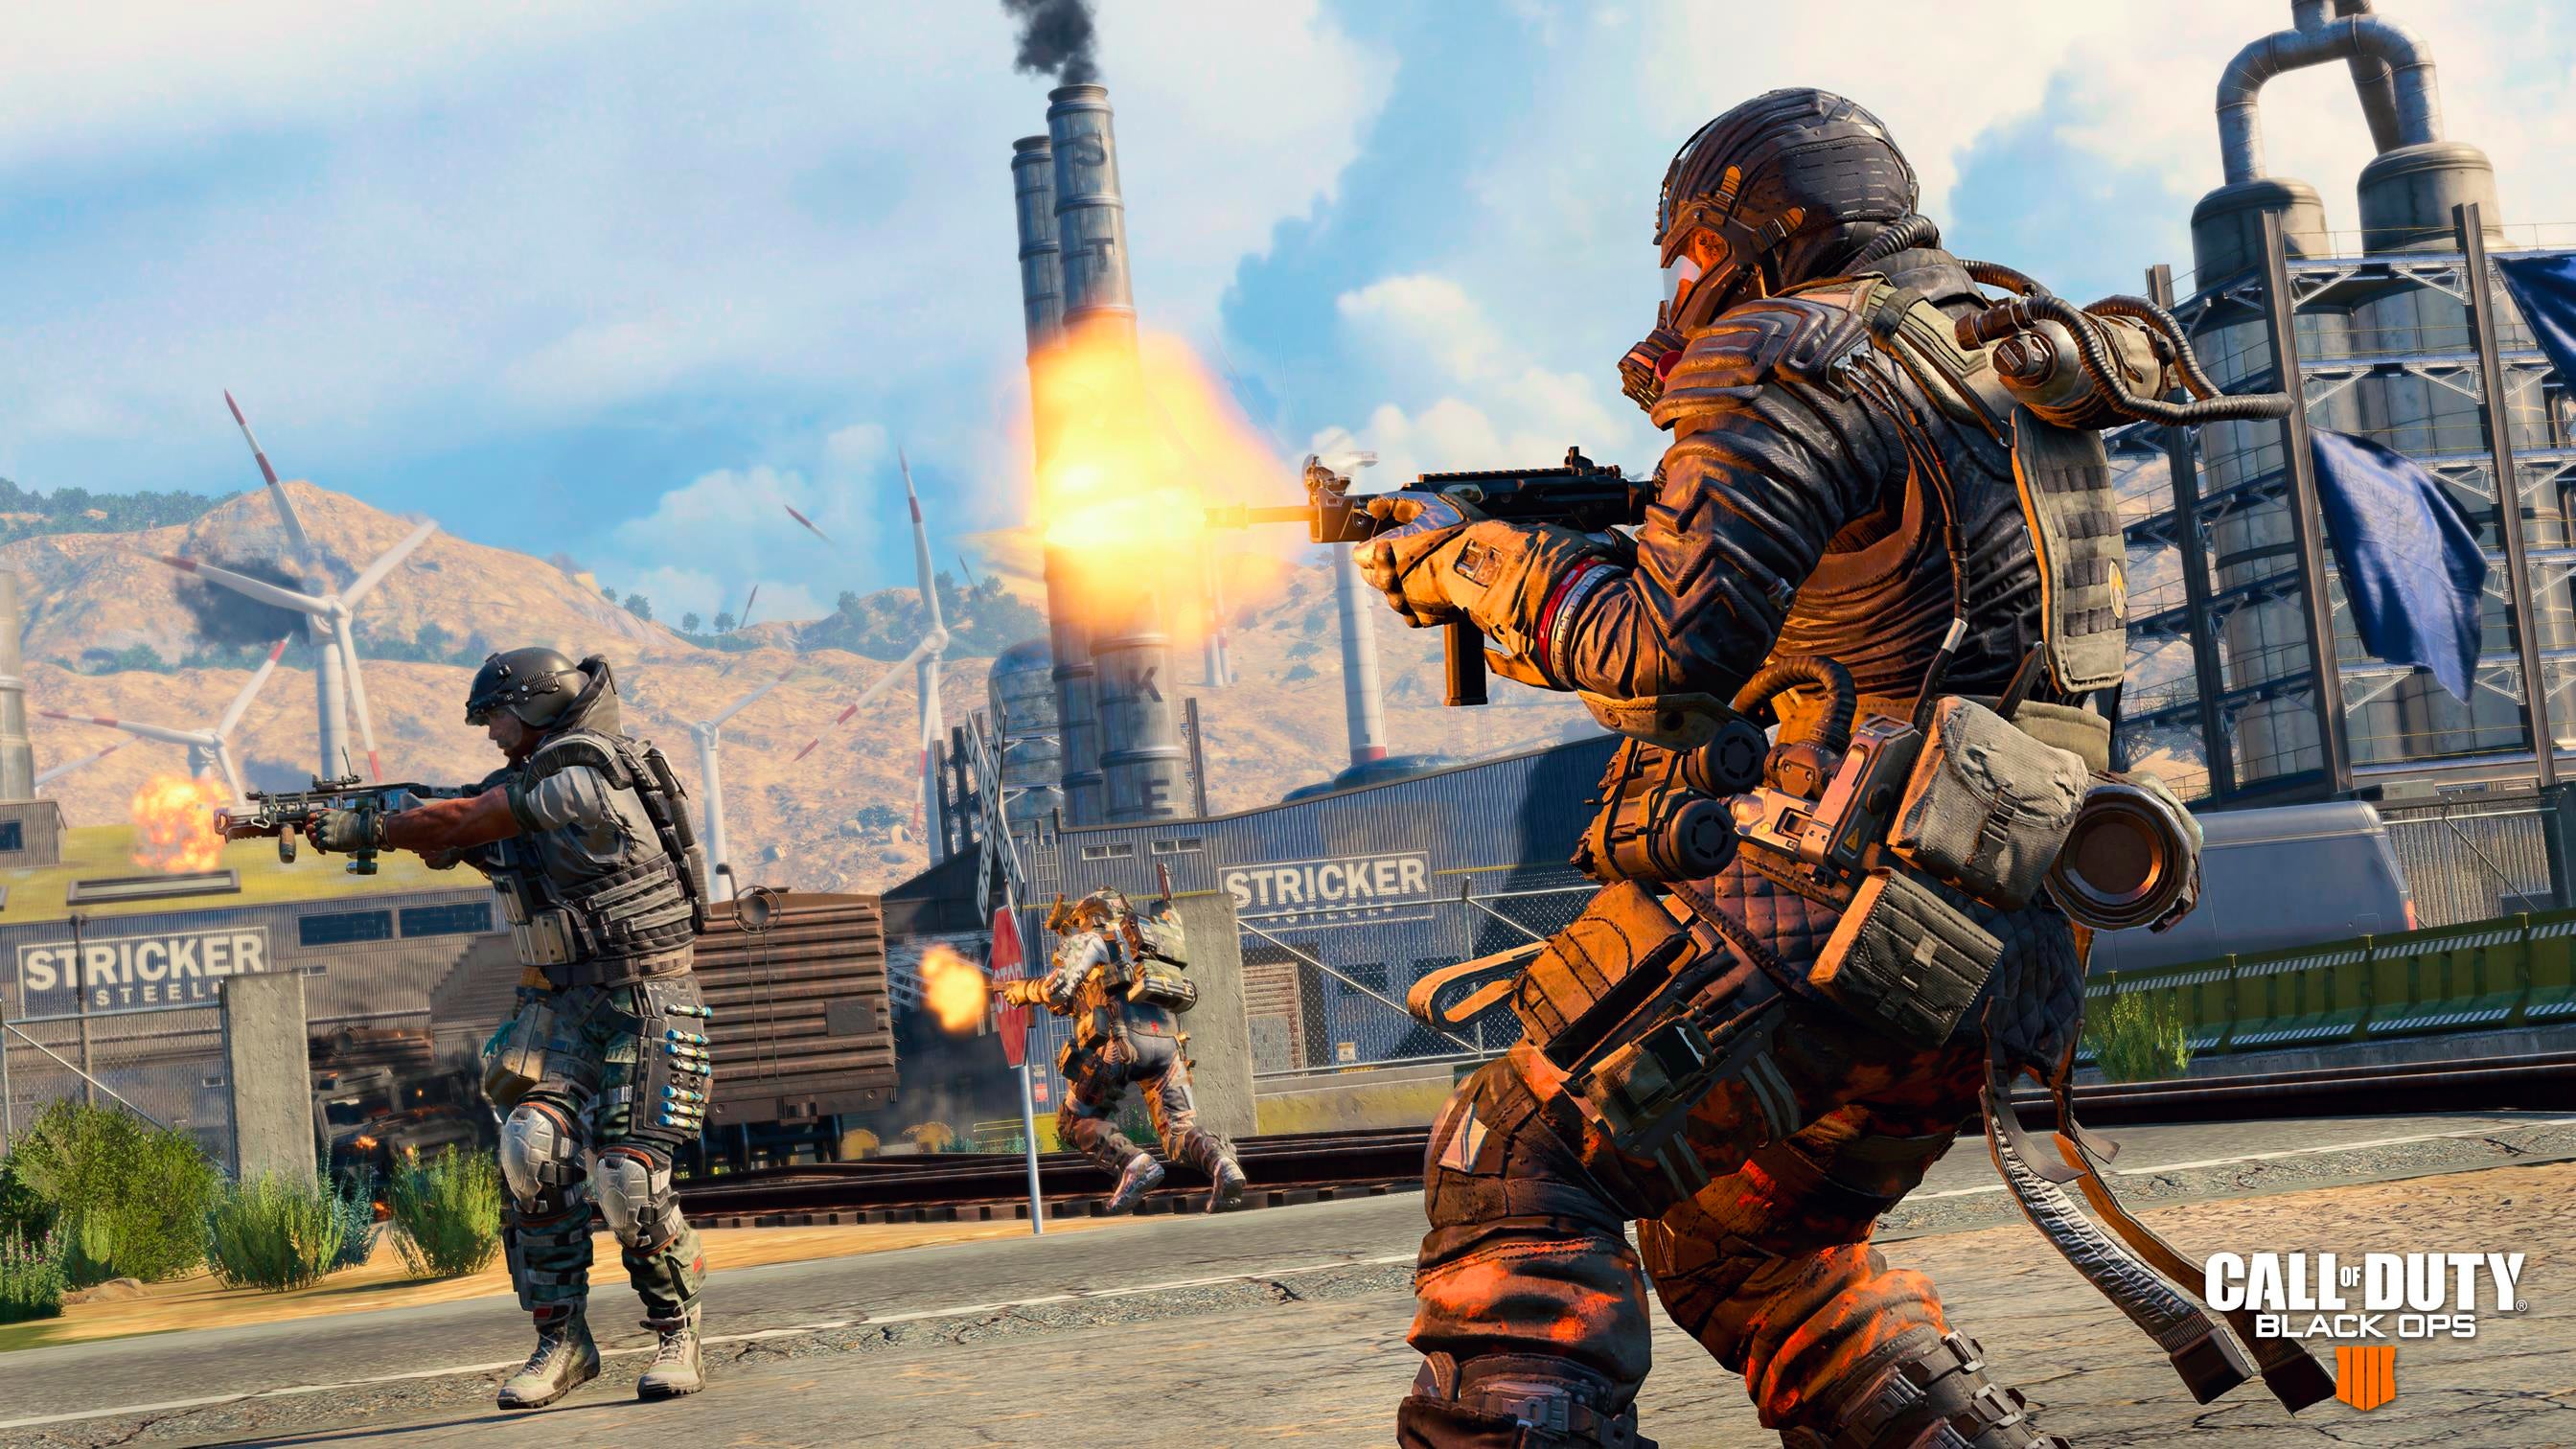 Image for Black Ops 4: Blackout drop locations and where to land - Firing Range, Nuketown, Asylum & more